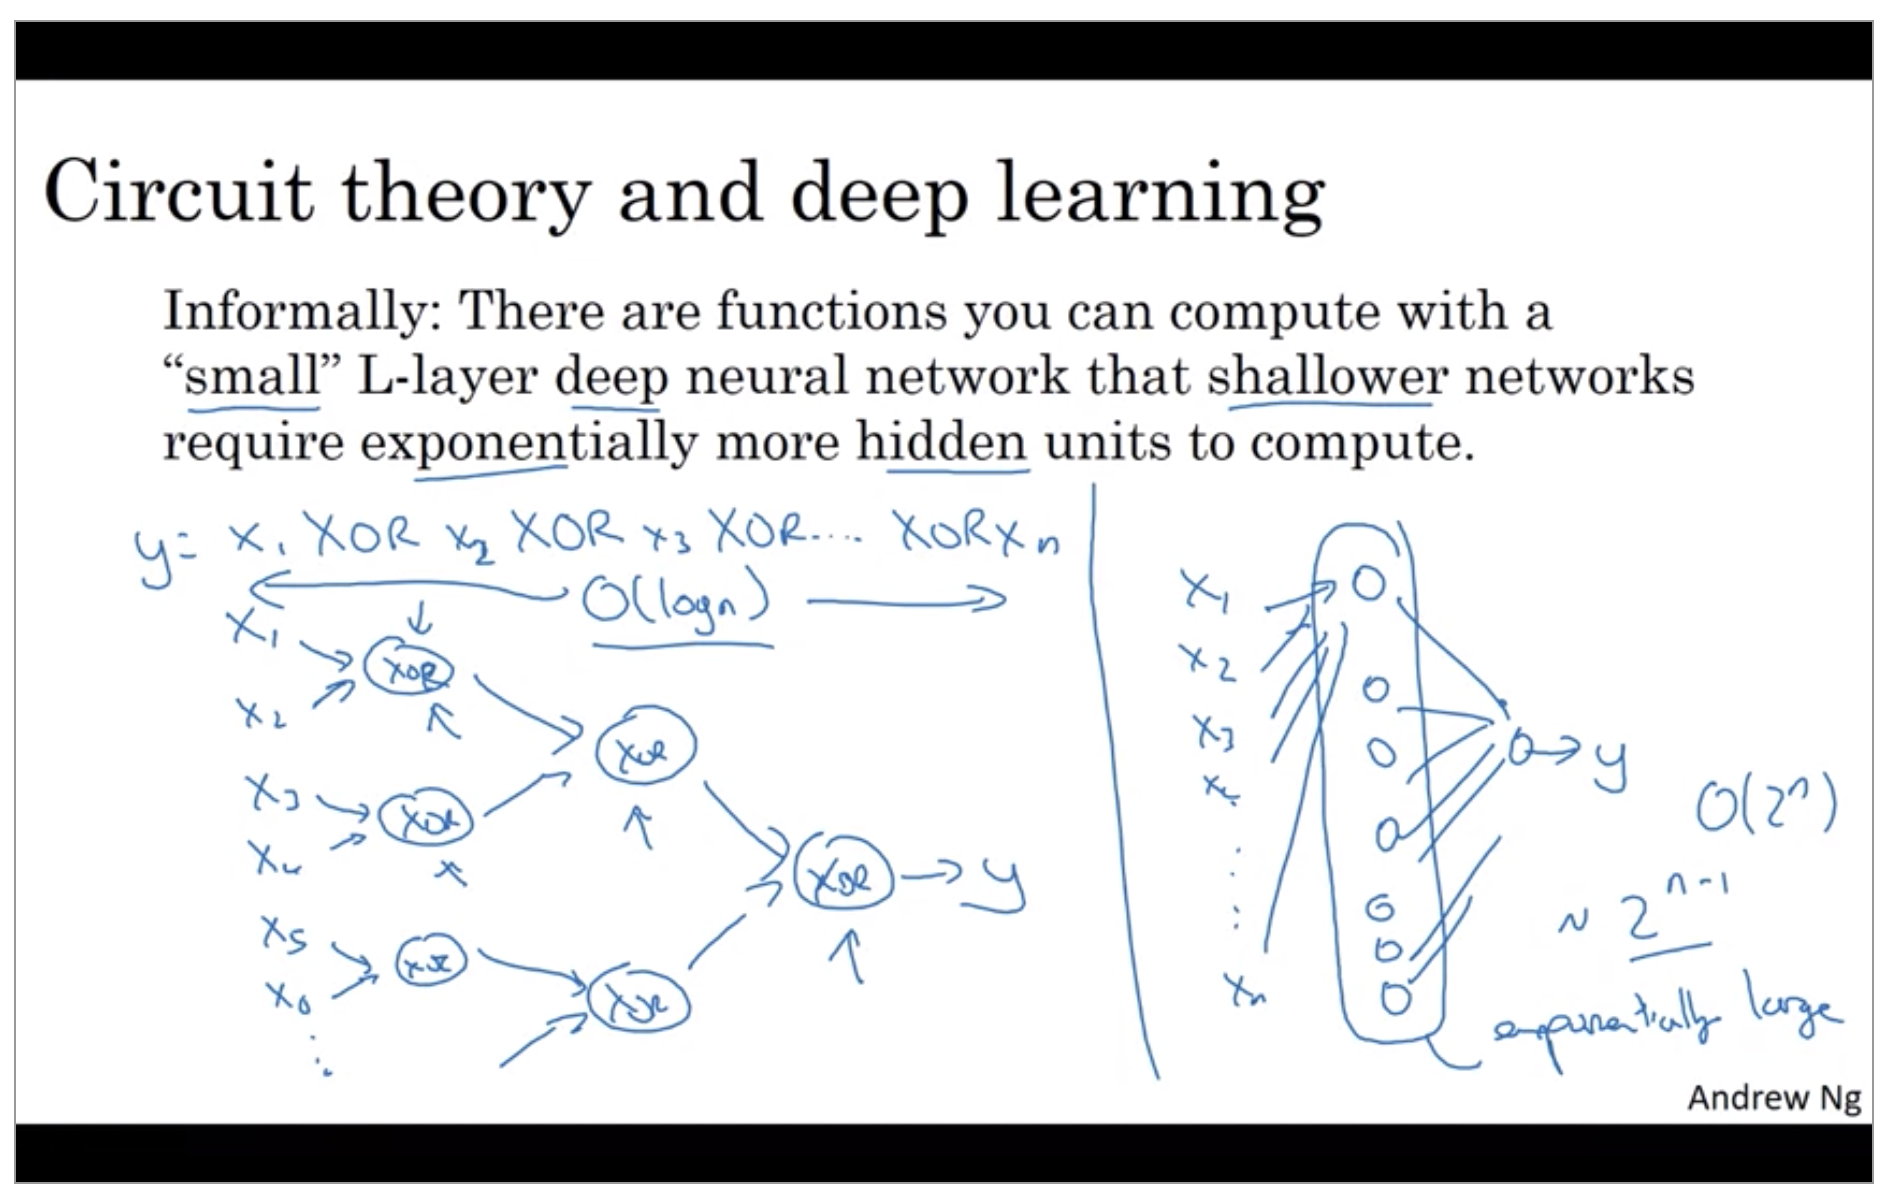 circuit-theory-and-deep-learning.png